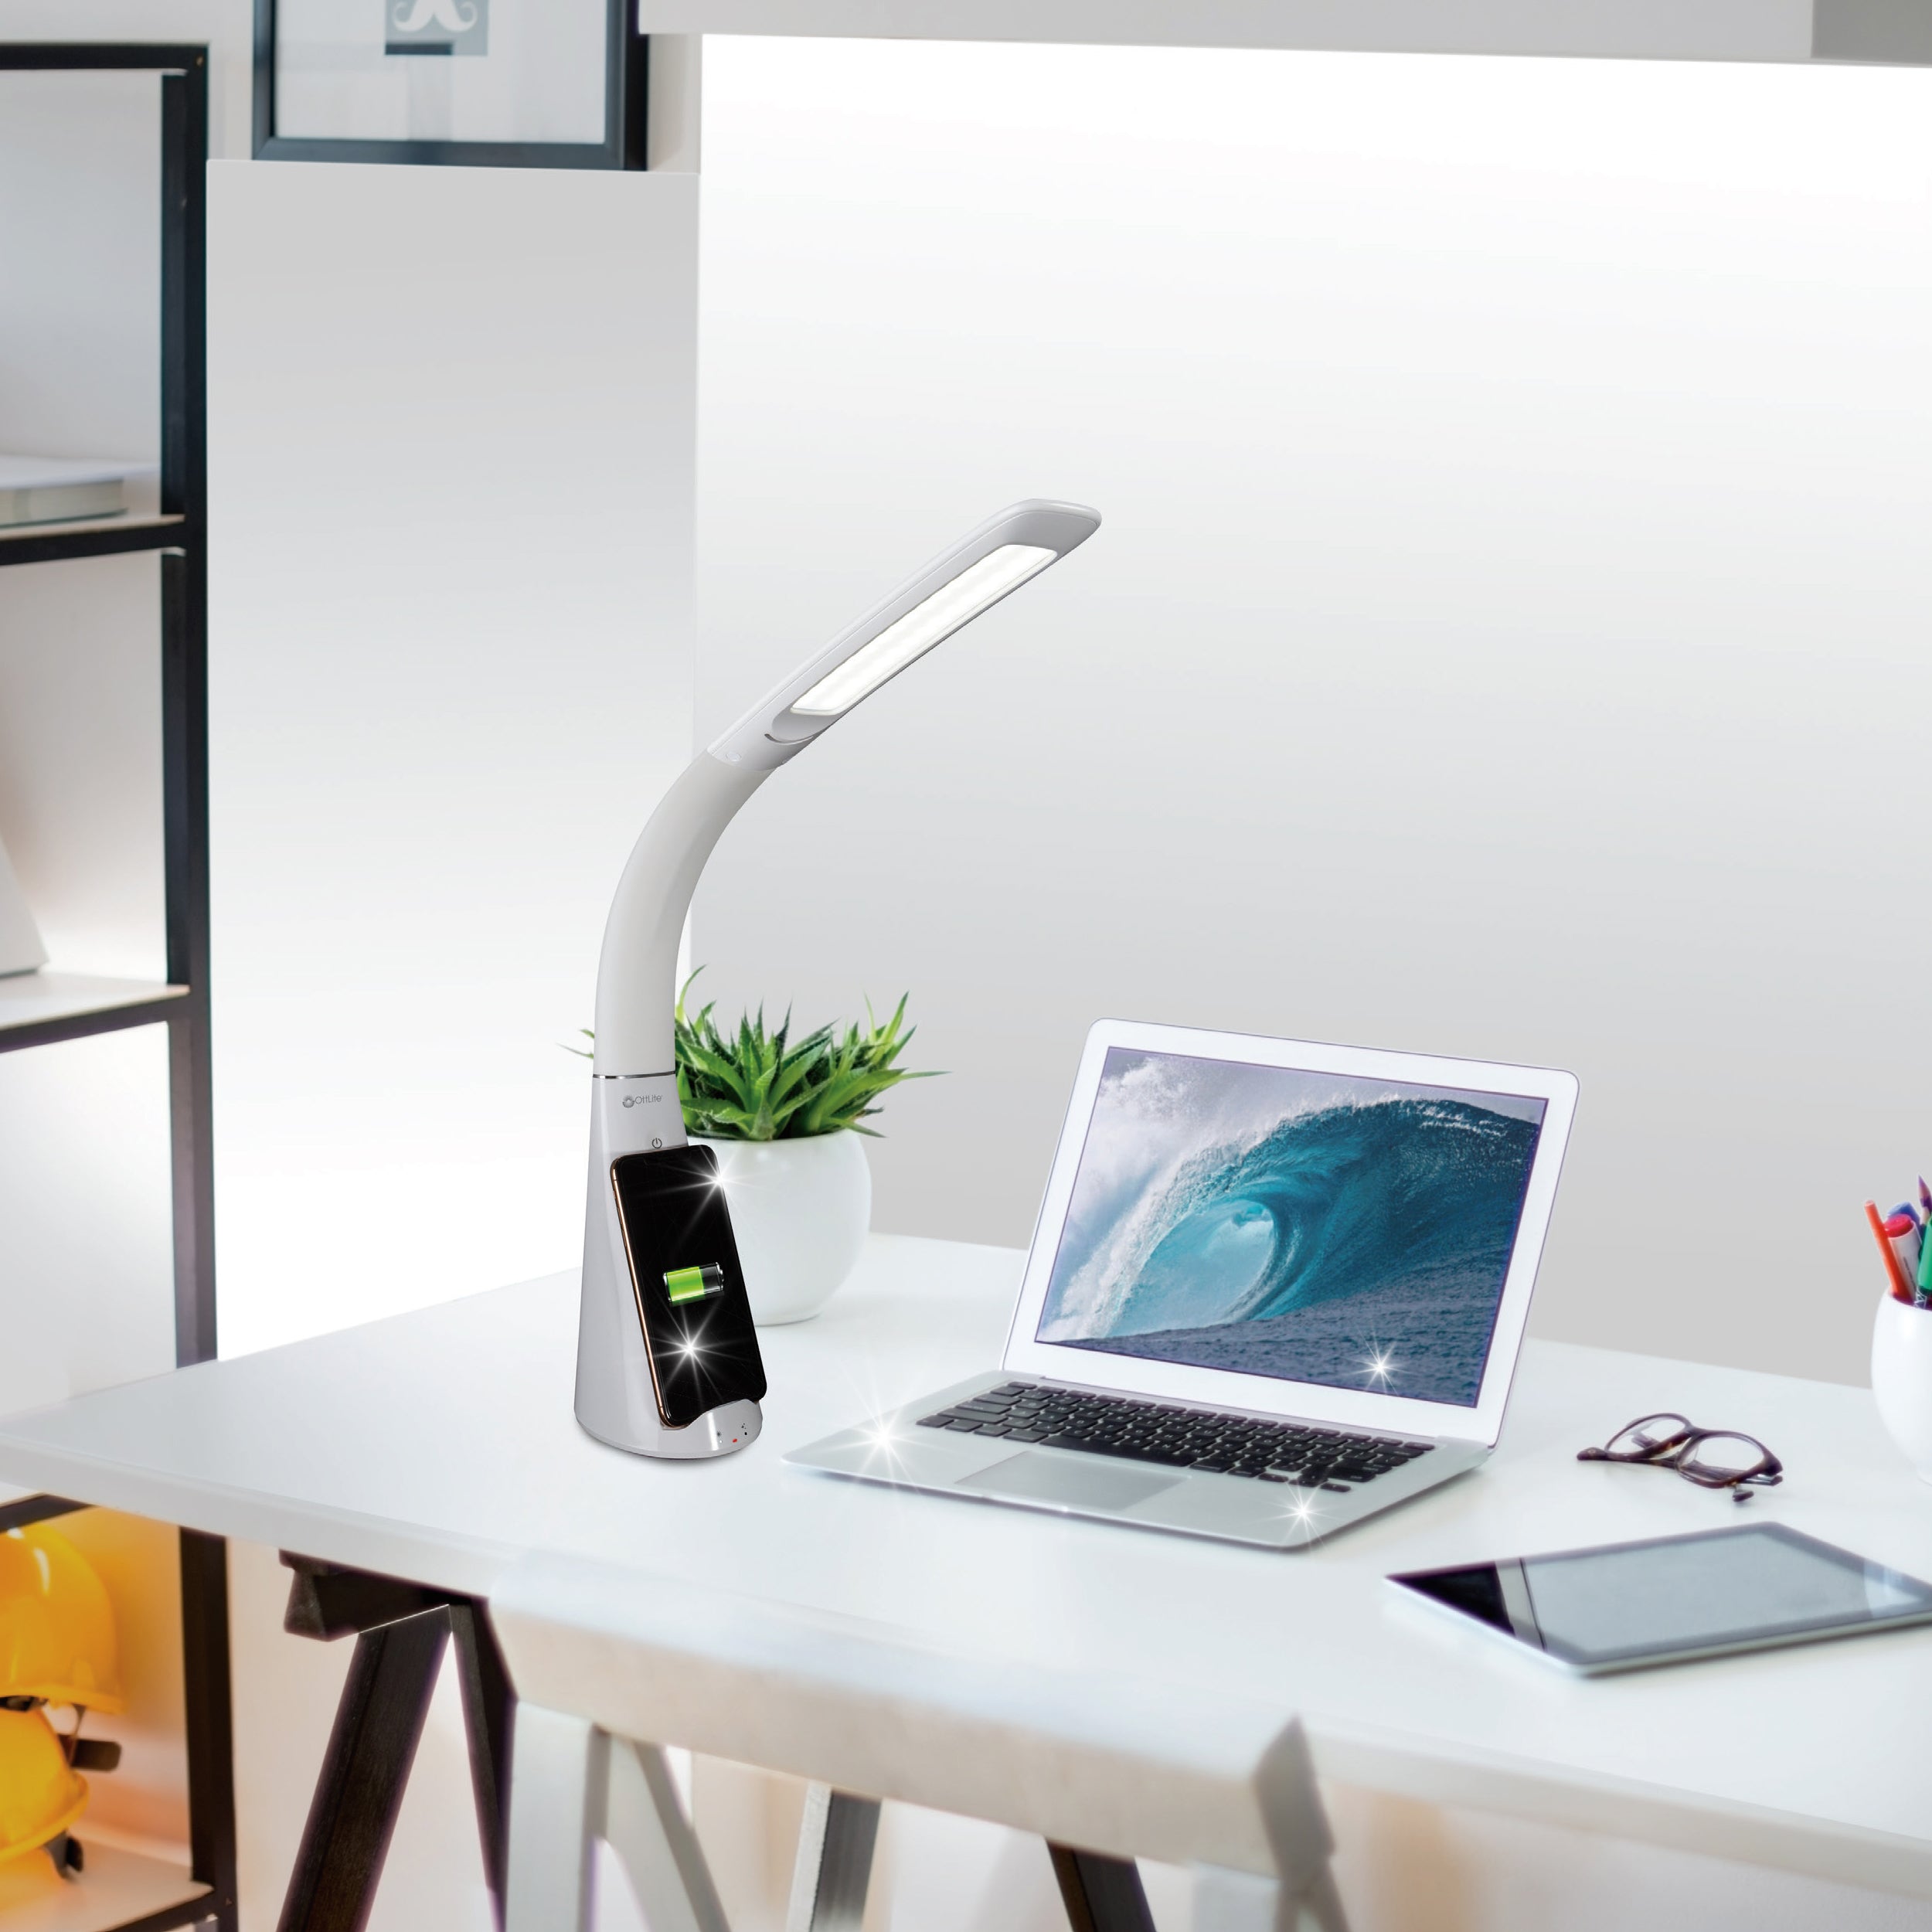 Purify LED Sanitizing Desk Lamp with Wireless Charging